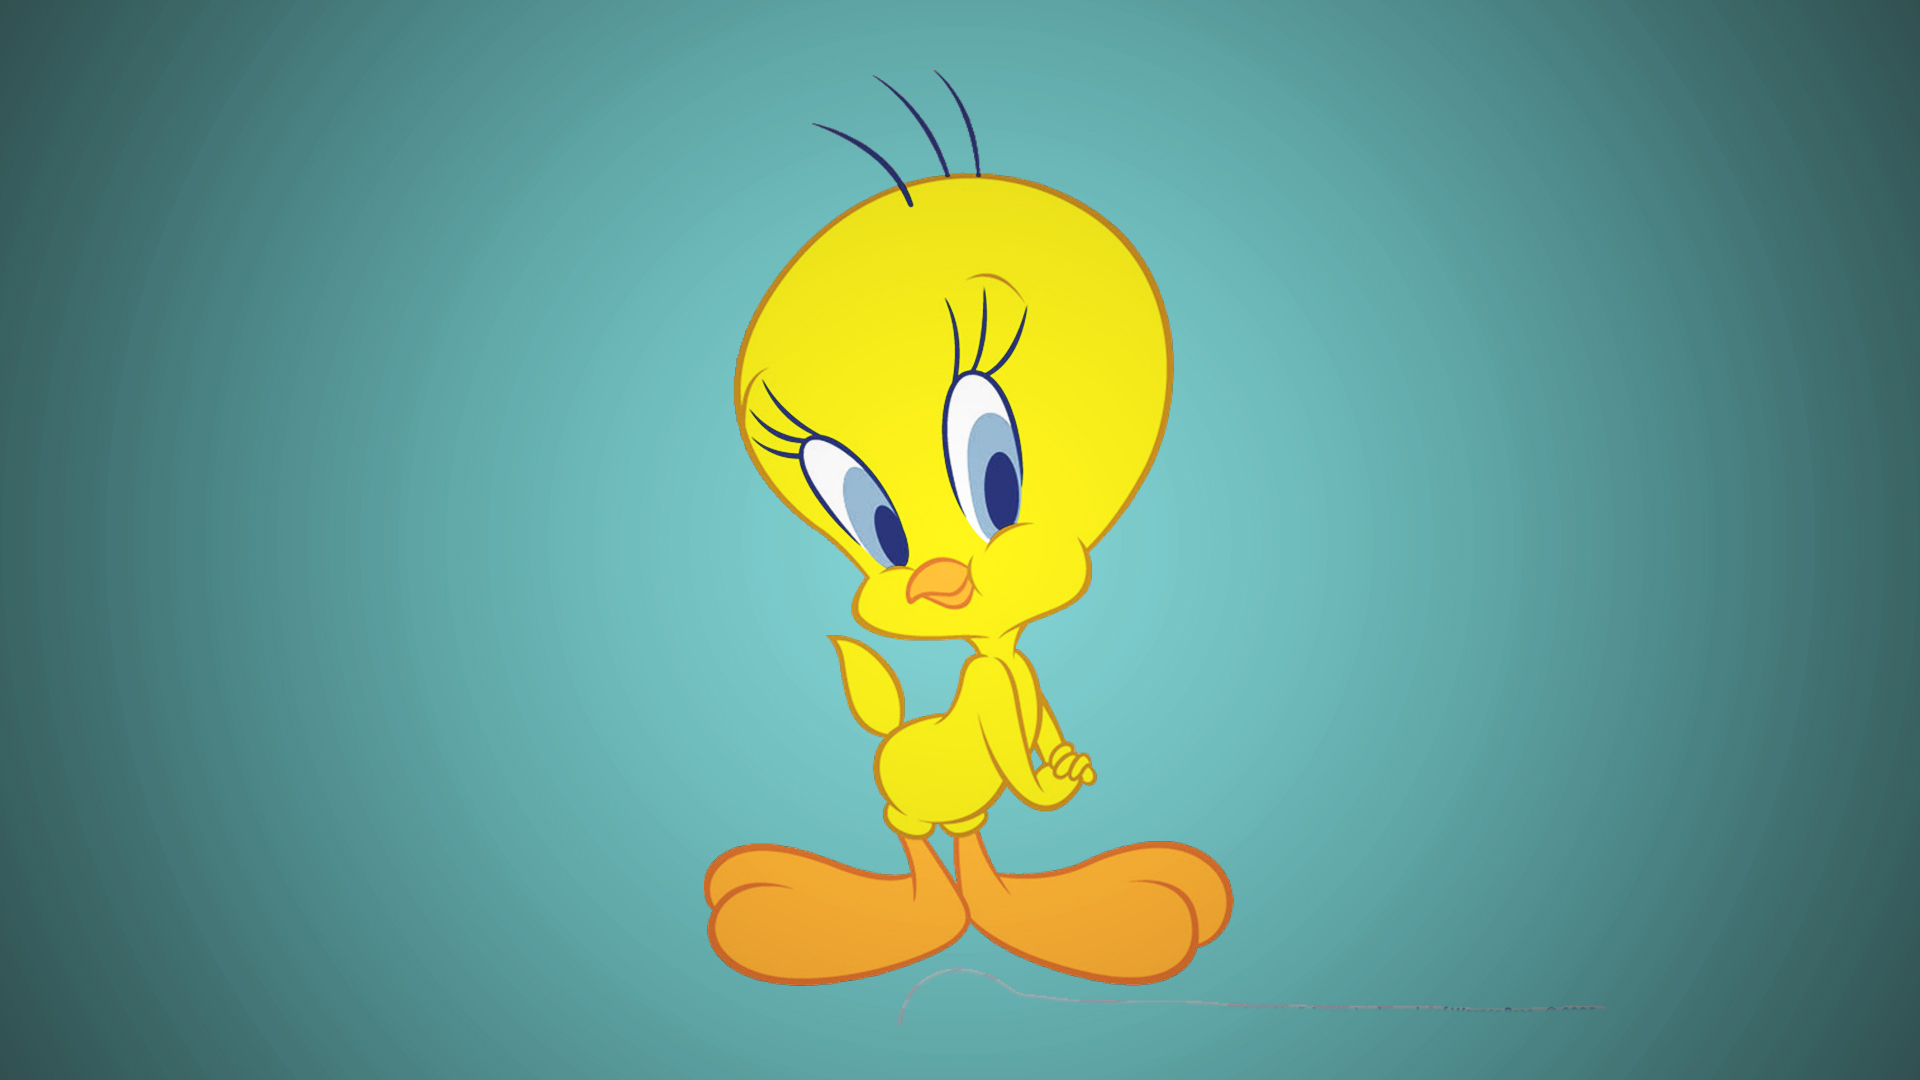 19 Famous Cartoon Characters with Big Eyes - Listrick